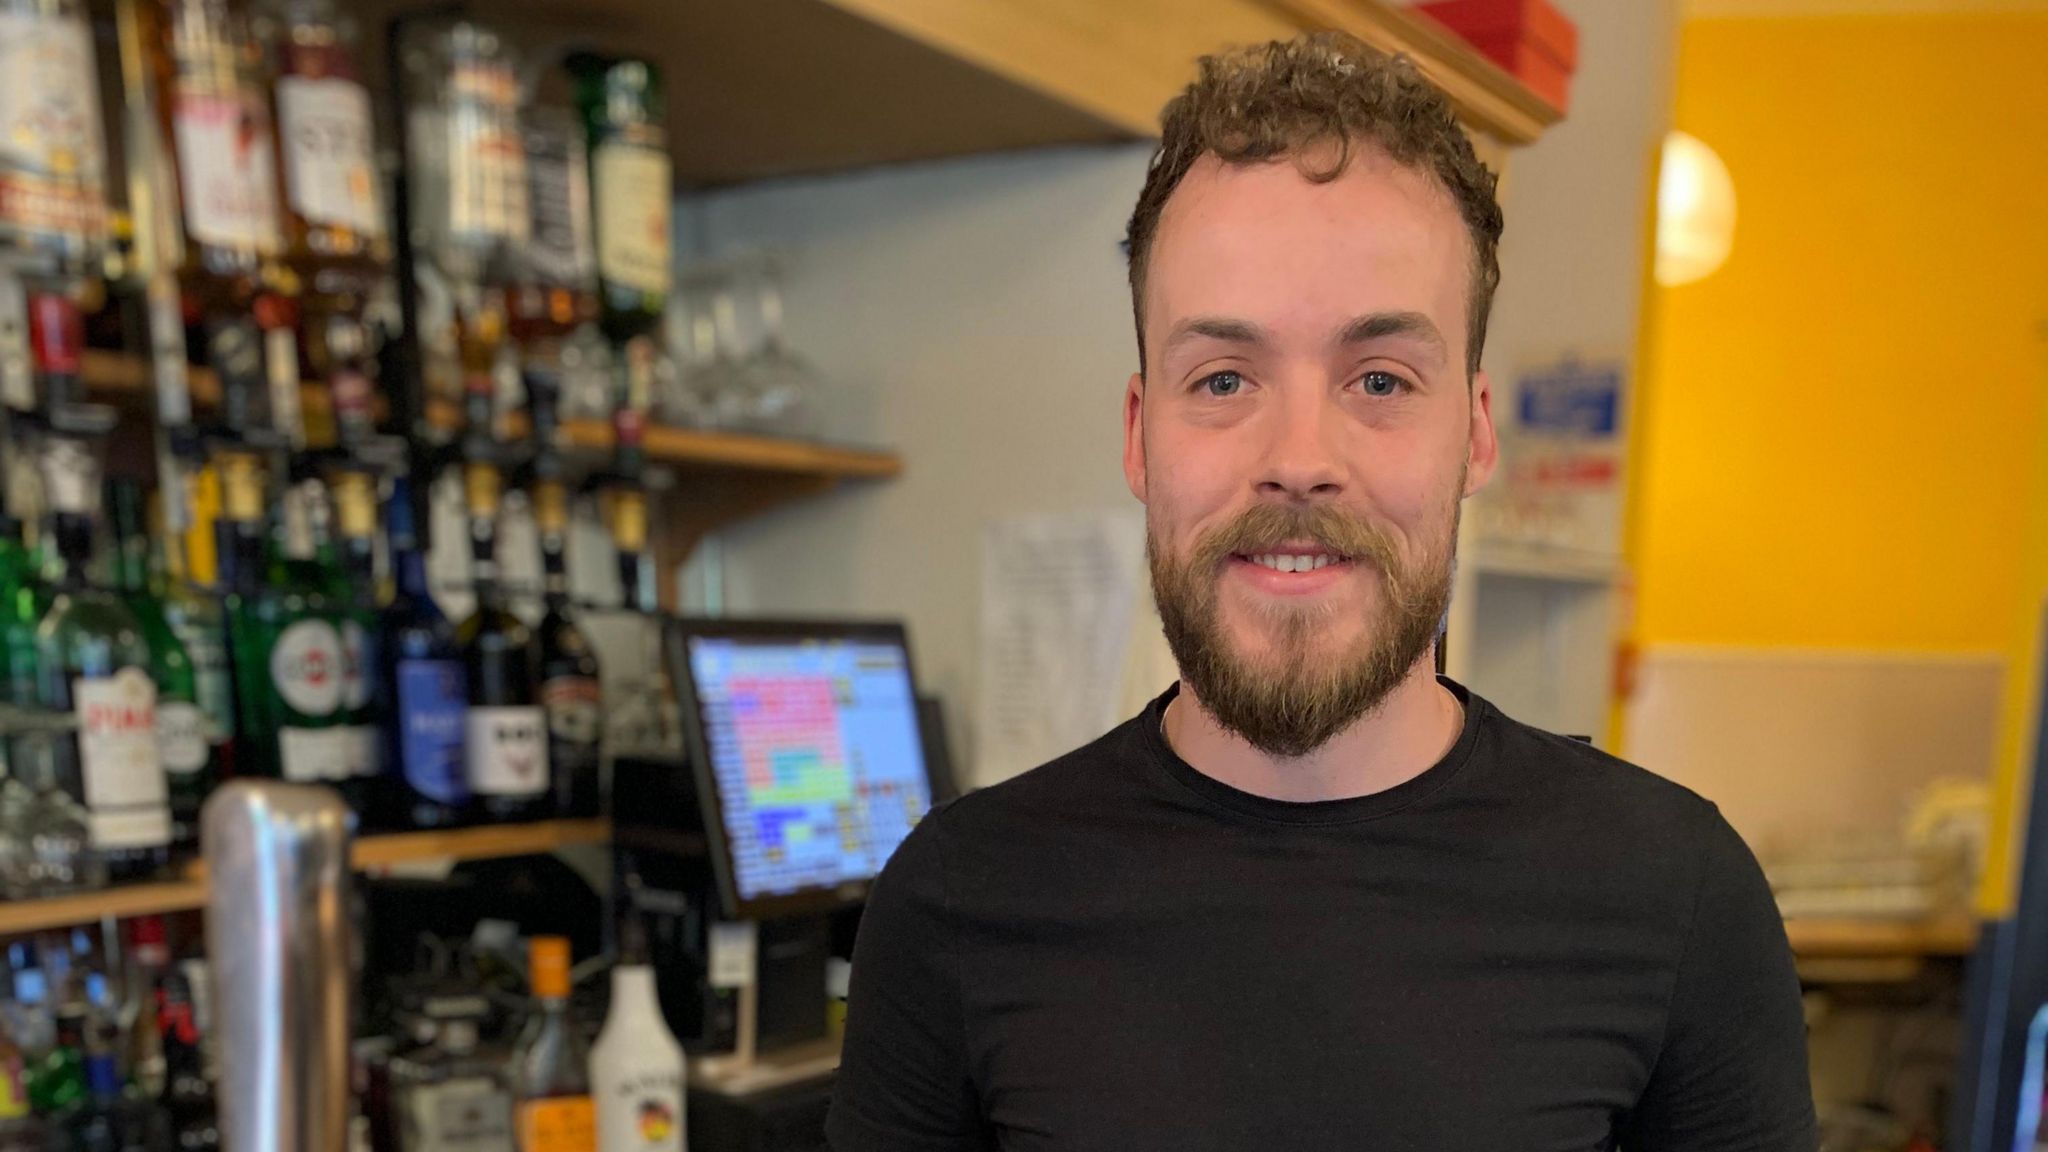 George Sperrin is behind the bar of a pub with a till machine behind him along with numerous alcohol bottles. He has a beard and curly dark hair and wears a black T-shirt